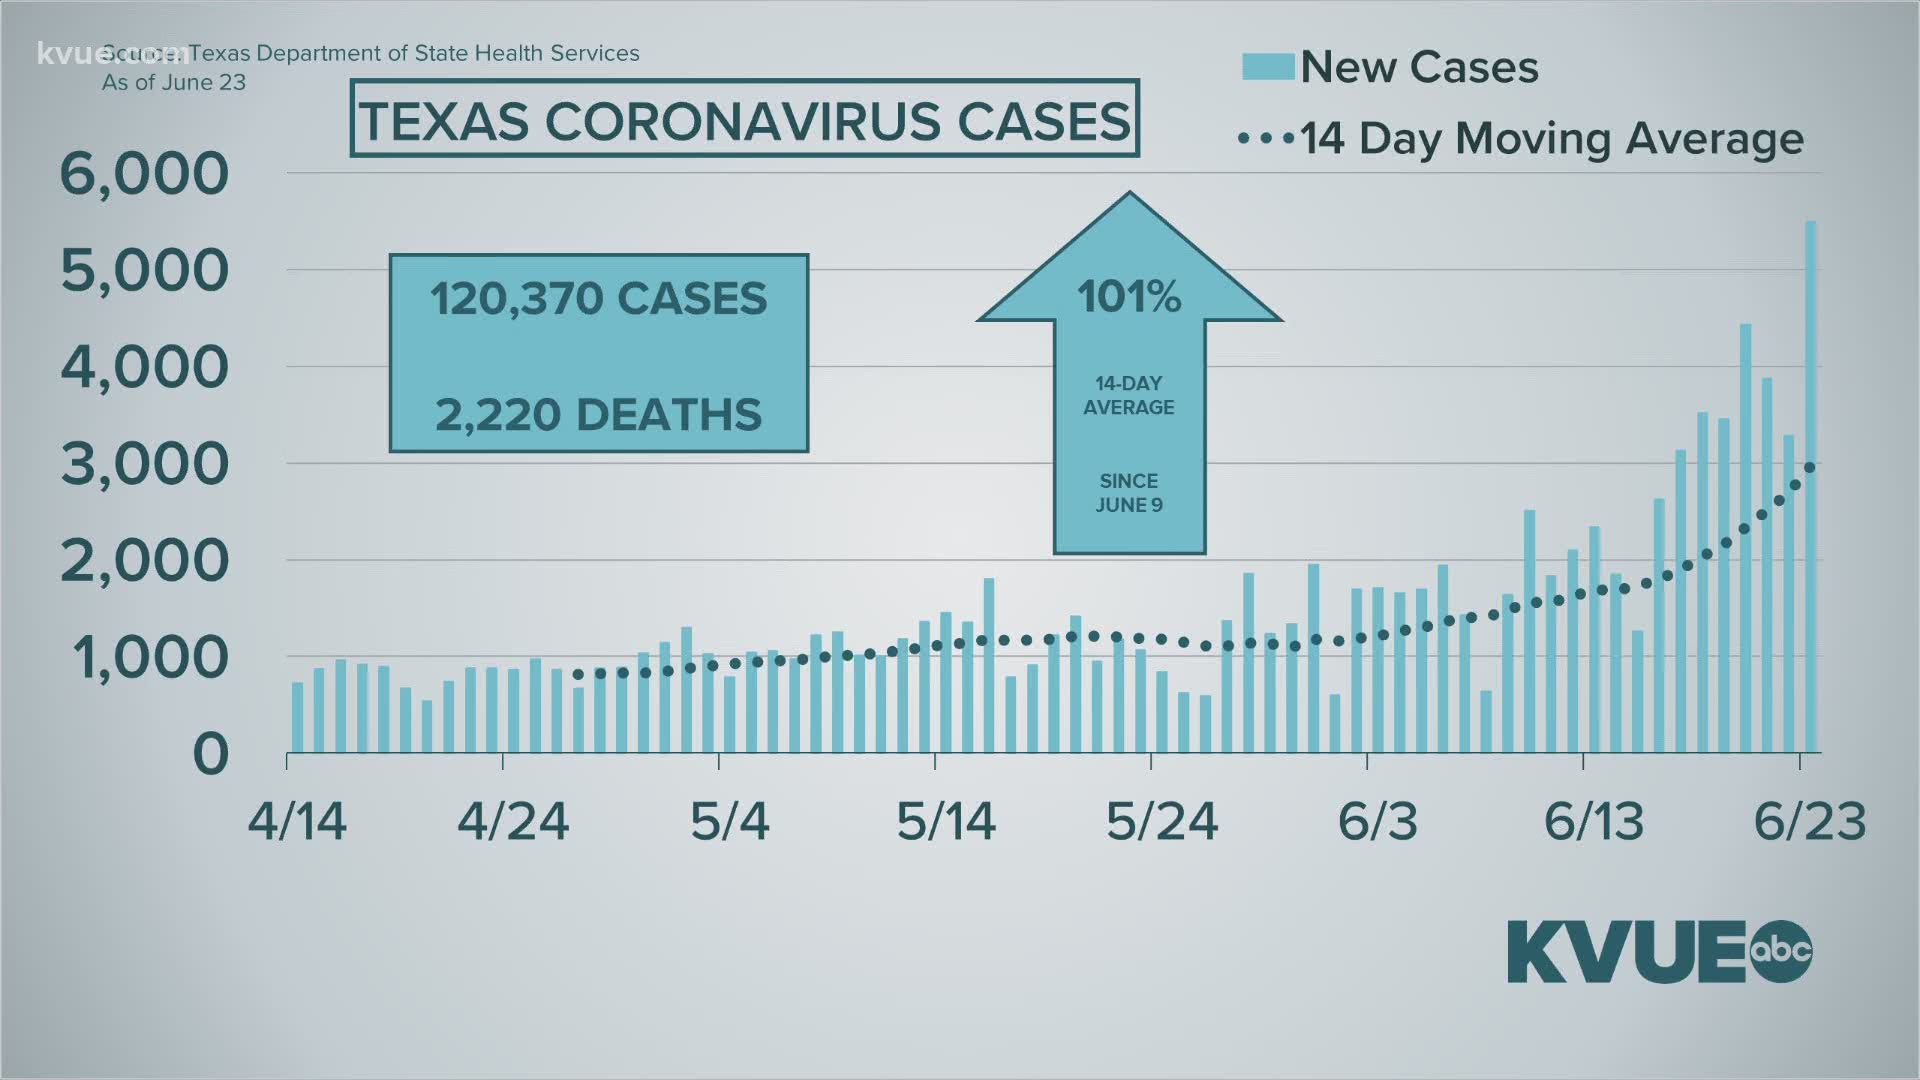 Texas reported another 5,400 cases on Tuesday. Overall, the State has seen a 101% increase in two weeks.